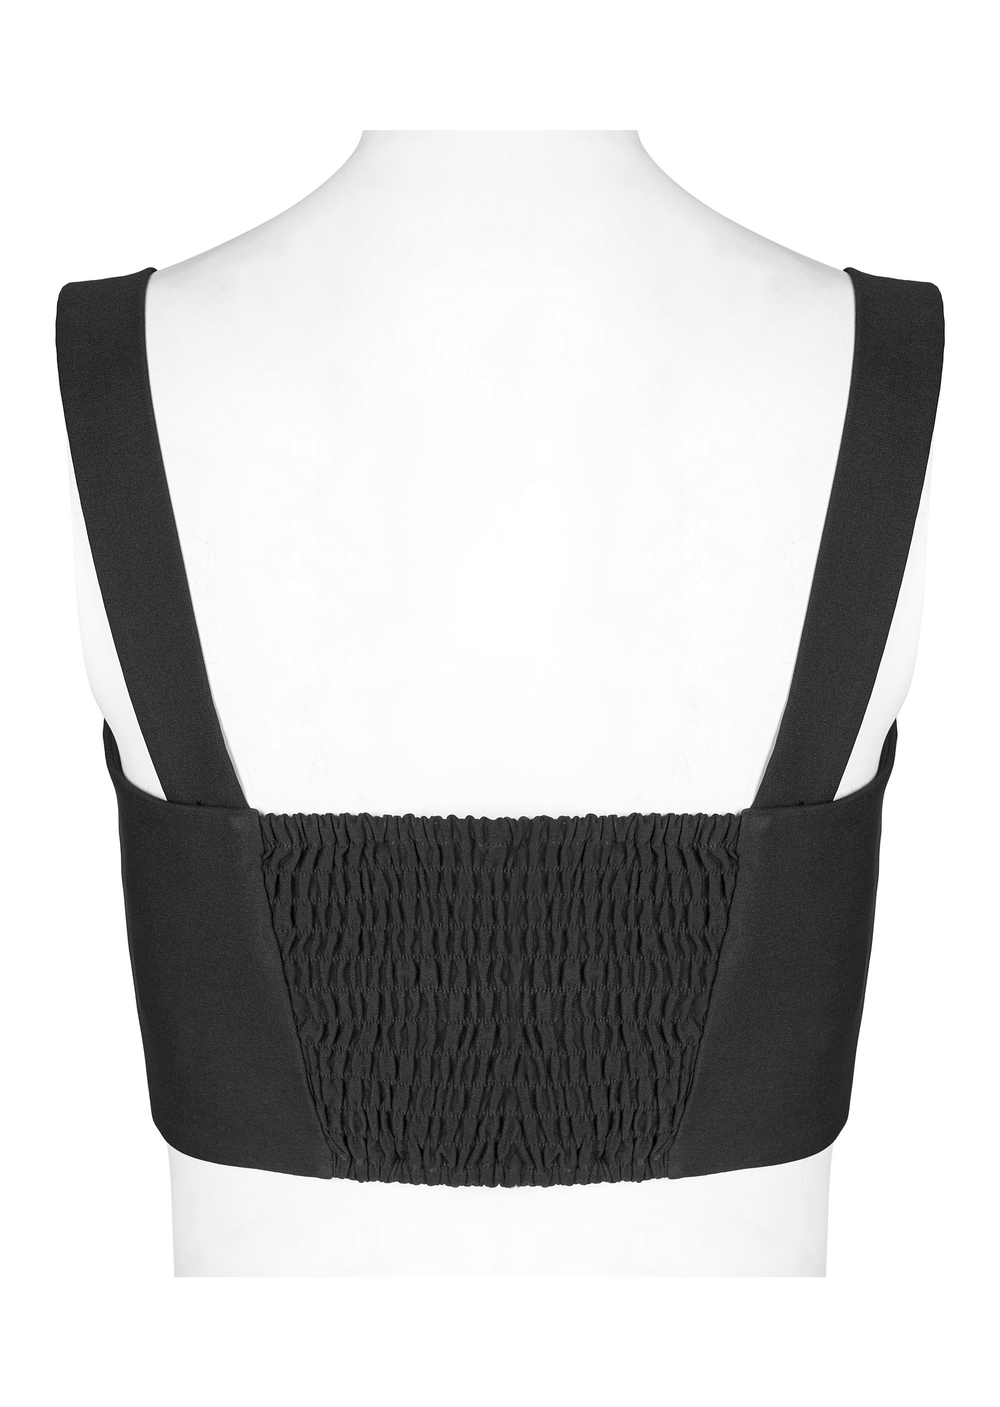 Gothic Black Corset Crop Top with Lace and Buckle